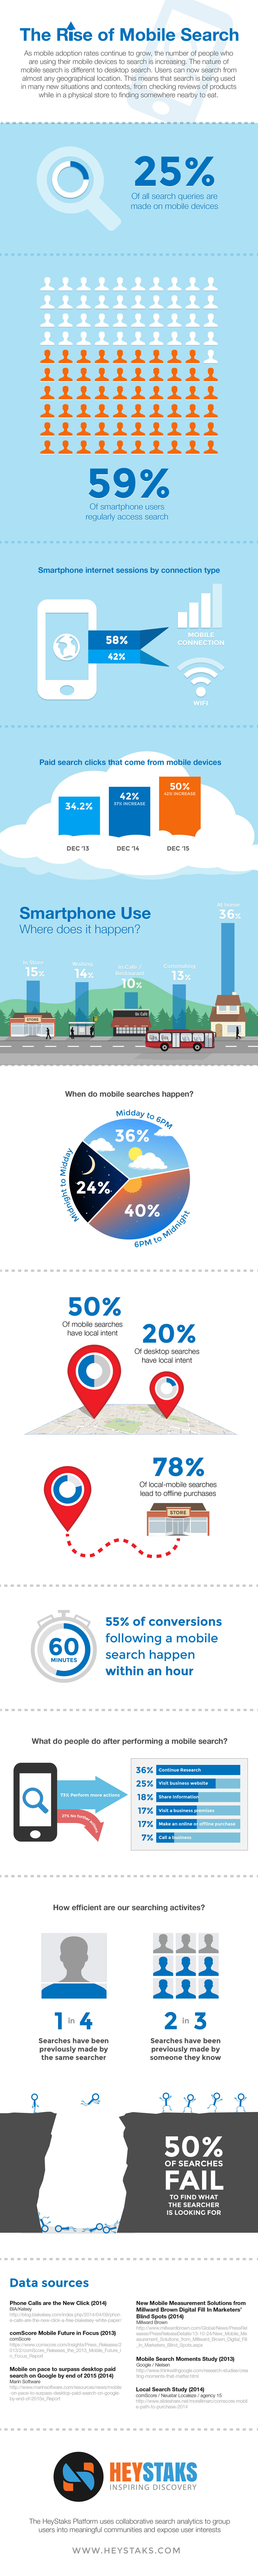 The_Rise_of_Mobile_Search-Infographic